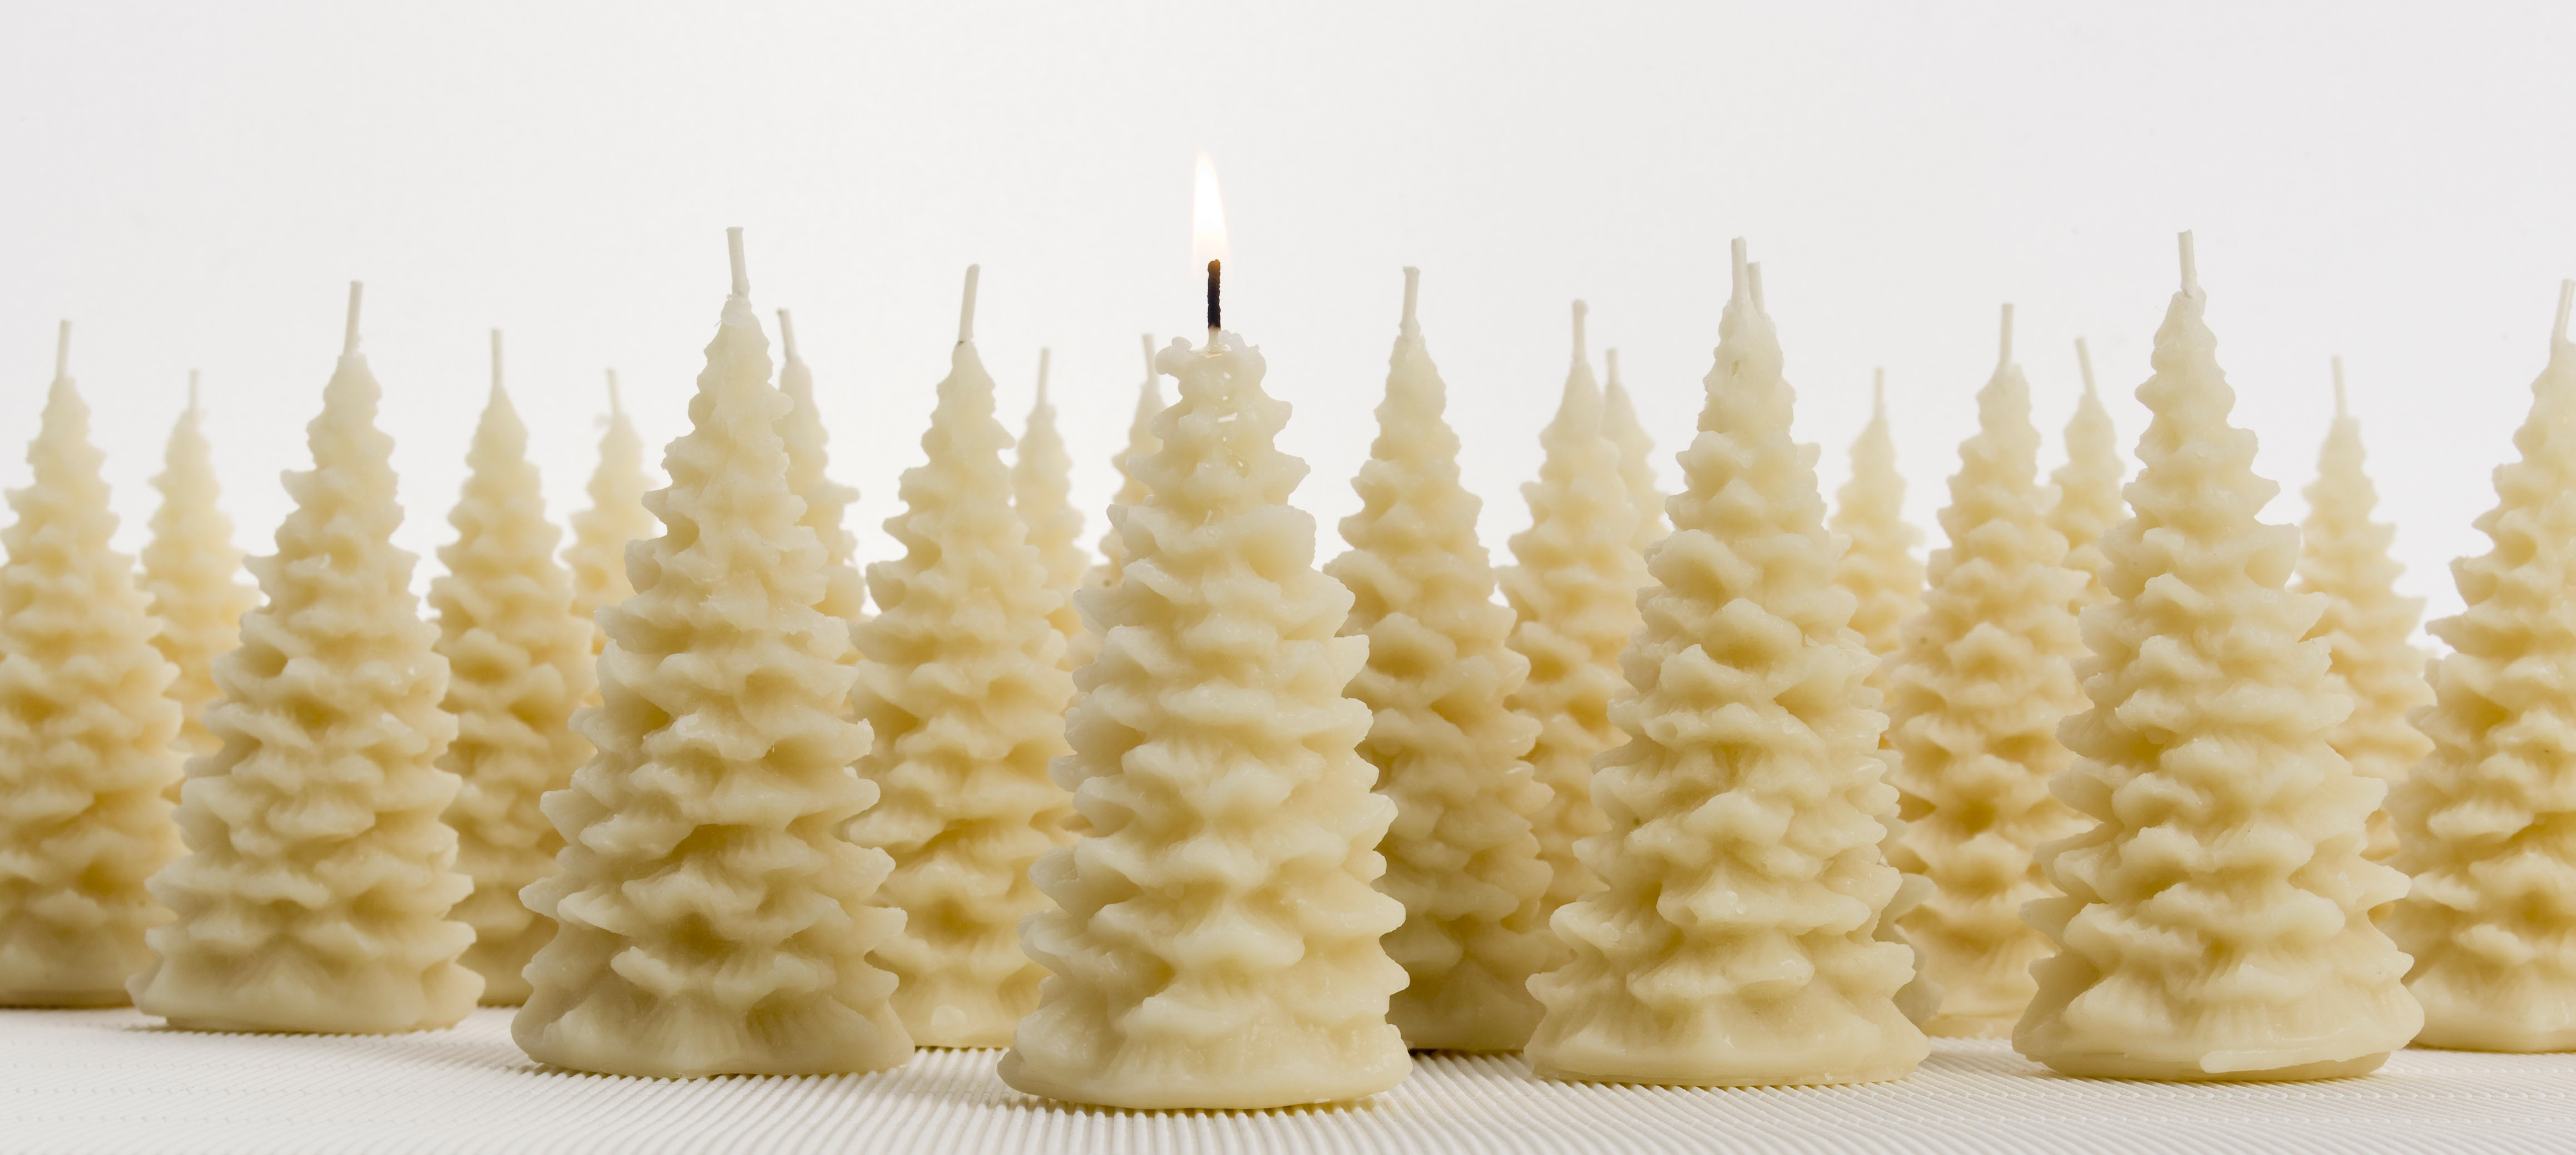 50 Kris Kringle gifts <$25 | Queen B Beeswax Candles